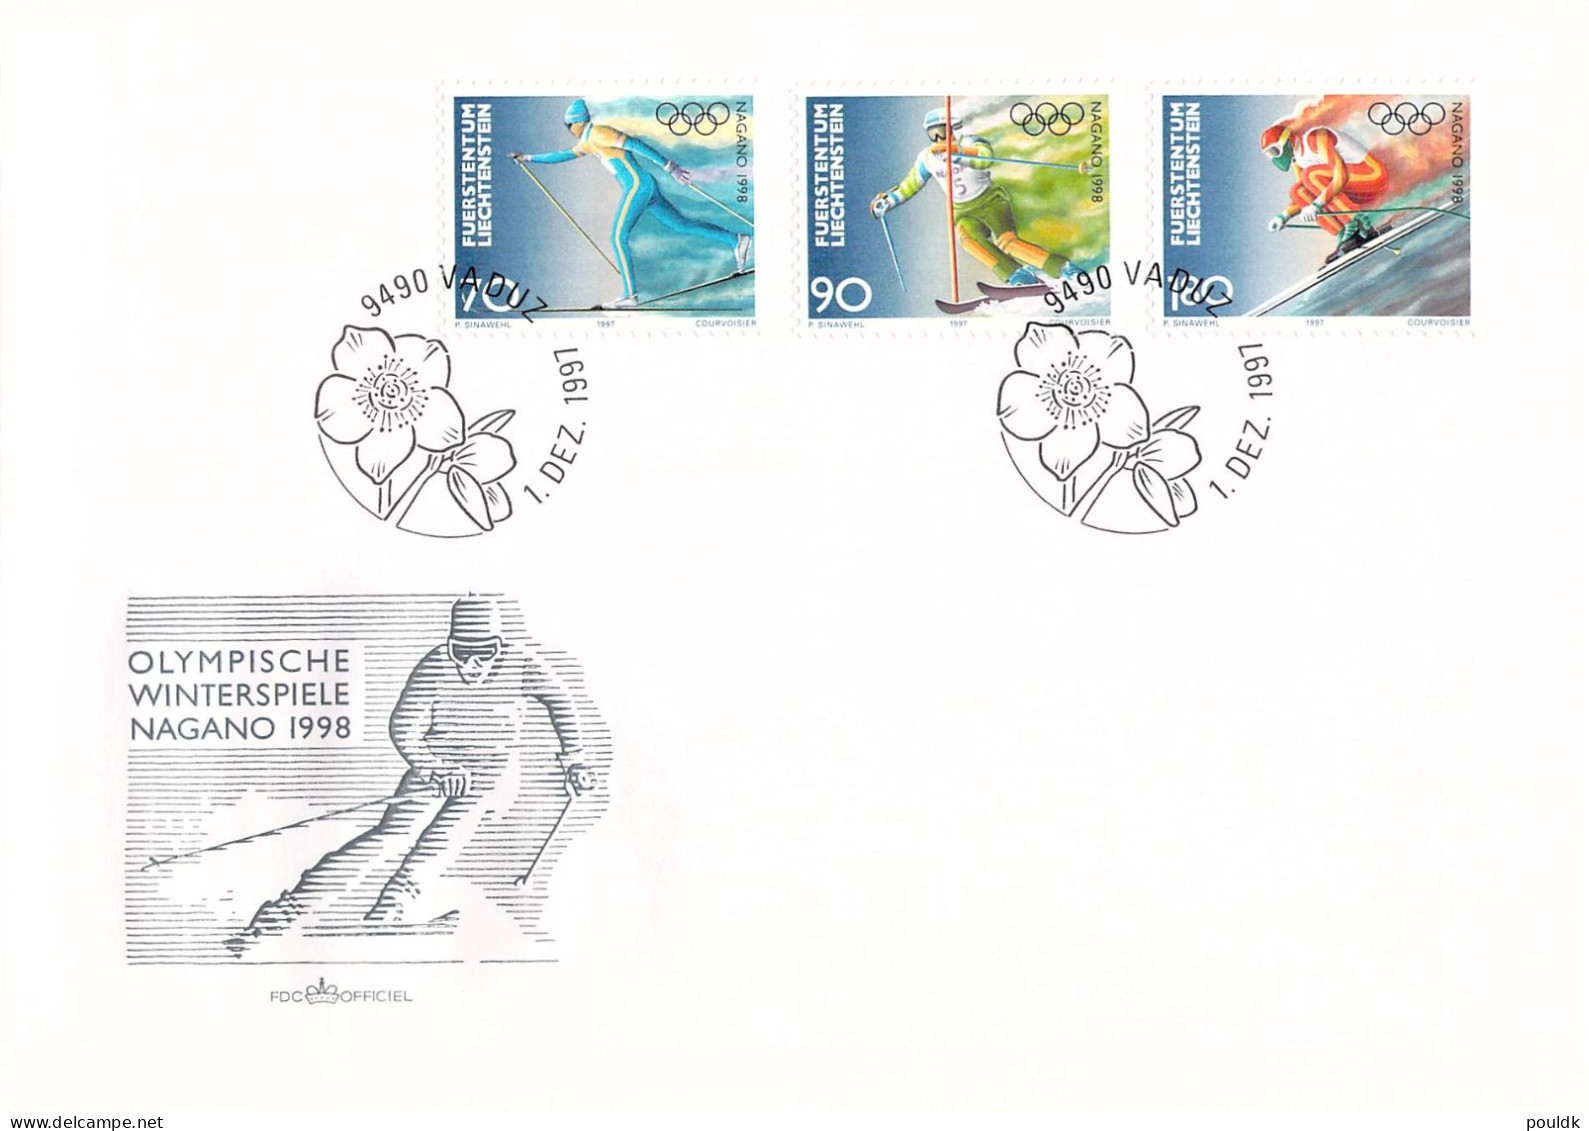 Olympic Games in Nagano 1998. 10 cards/covers. Postal weight approx 80 gramms. Please read Sales Conditions under Image